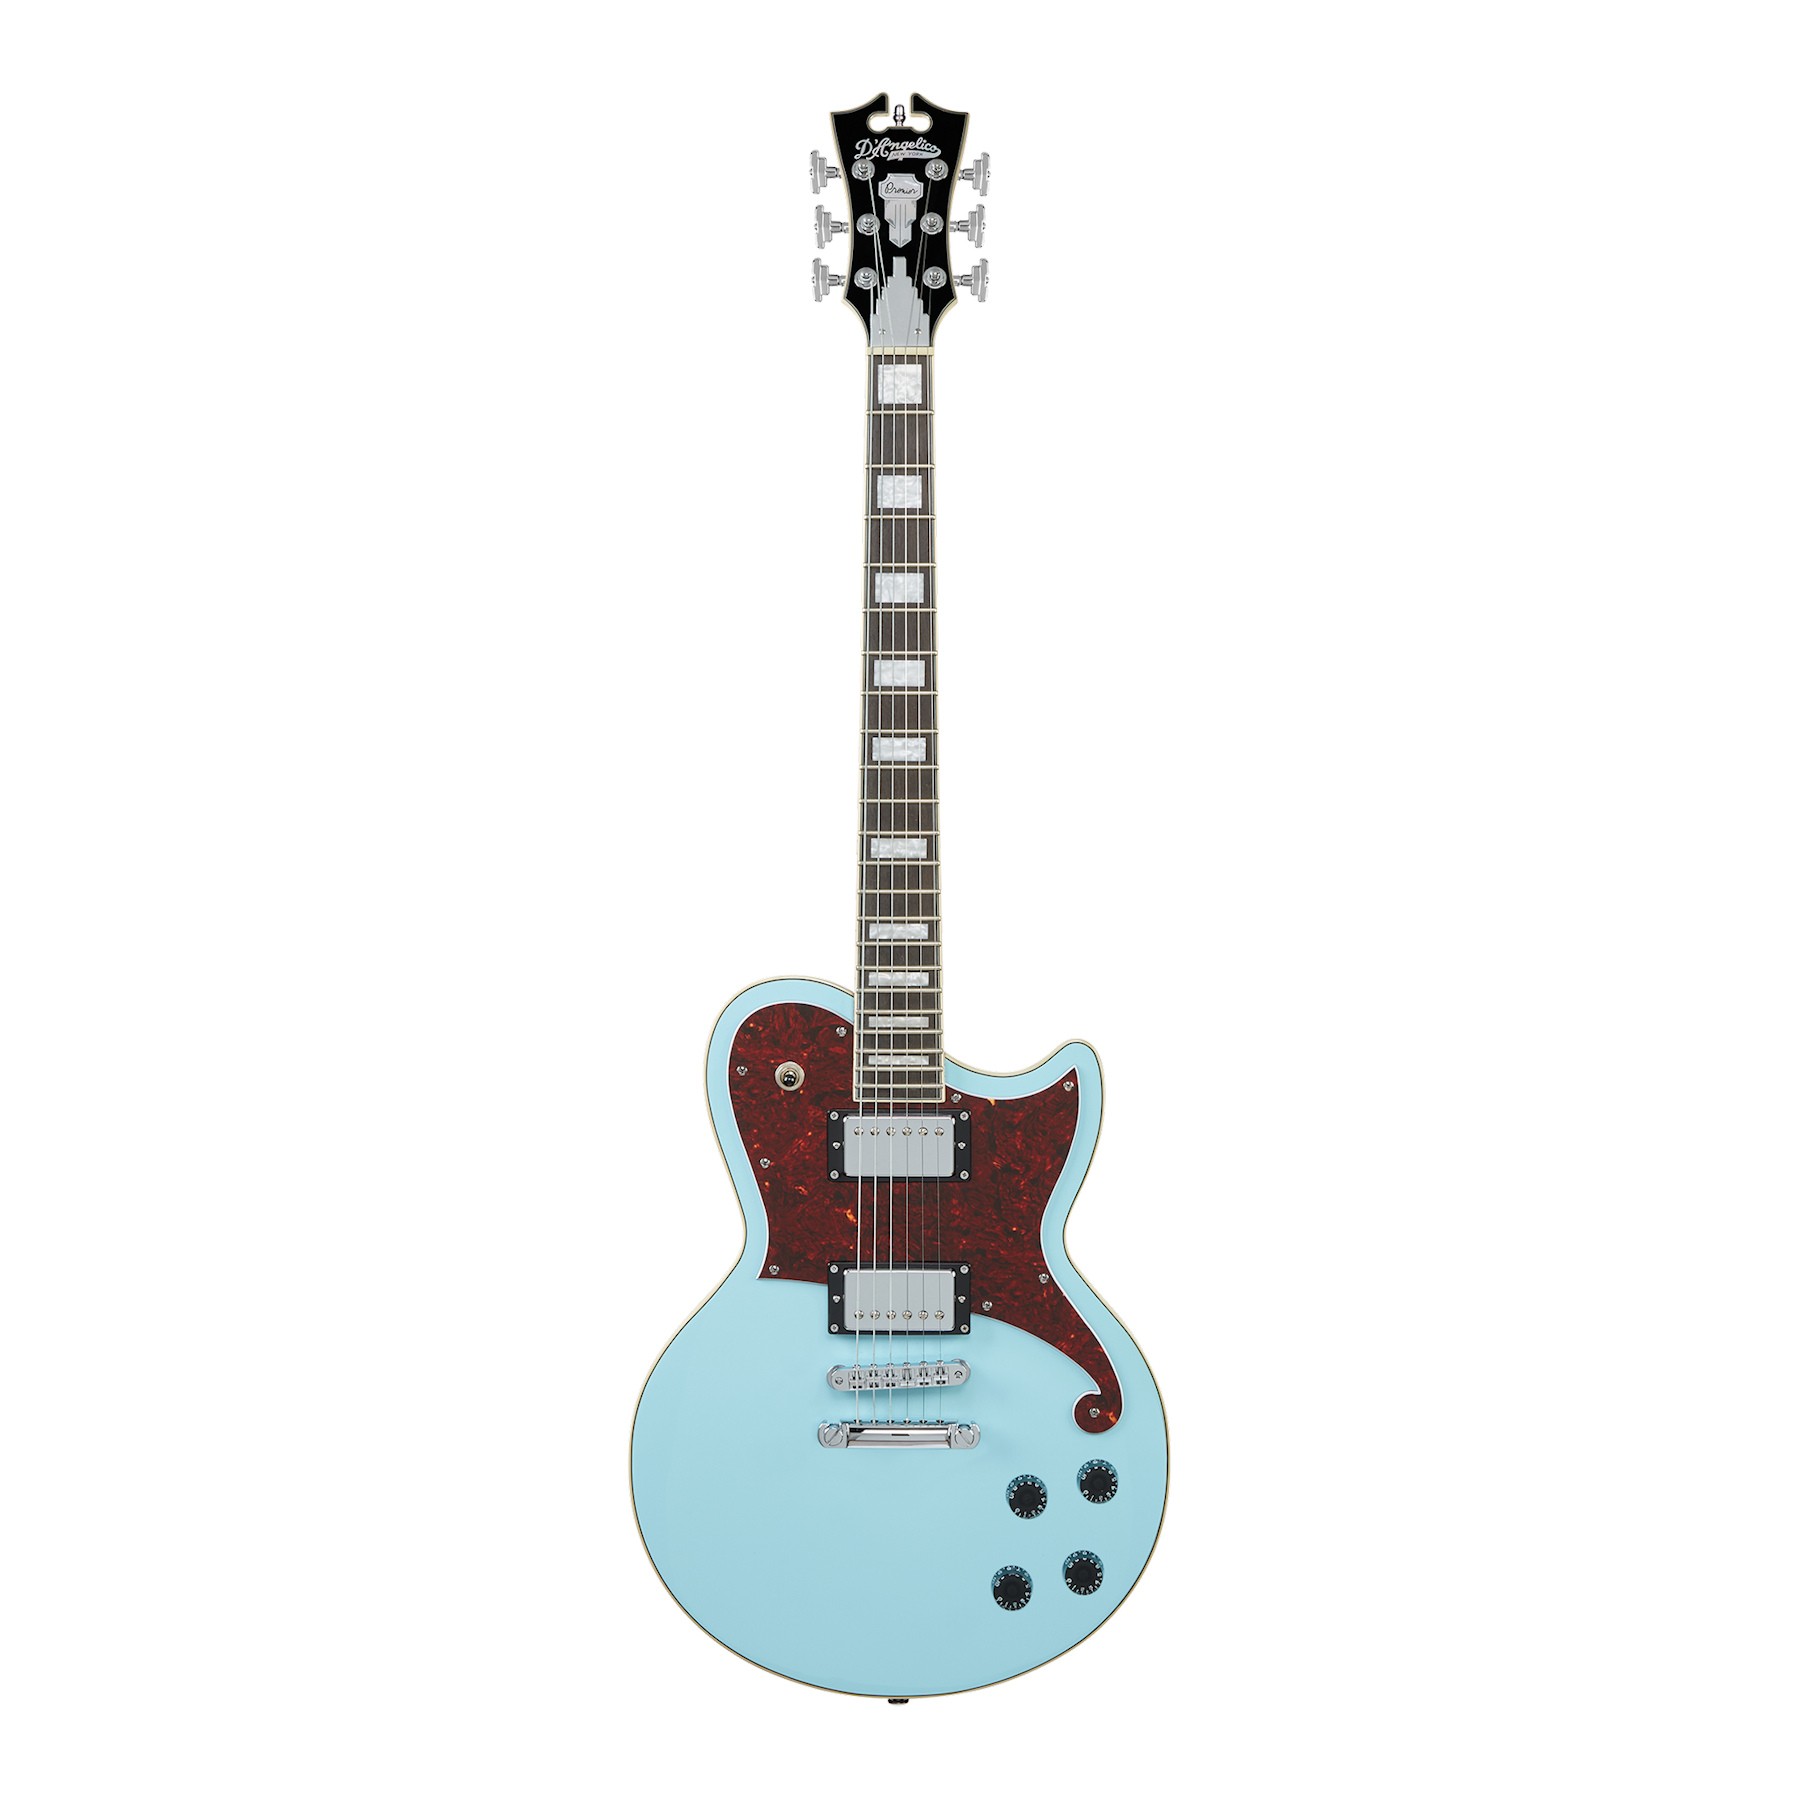 D'Angelico String Semi-Hollow-Body Electrical Guitar, Right, Sky Blue  (DAPBEDSHSBMCS)